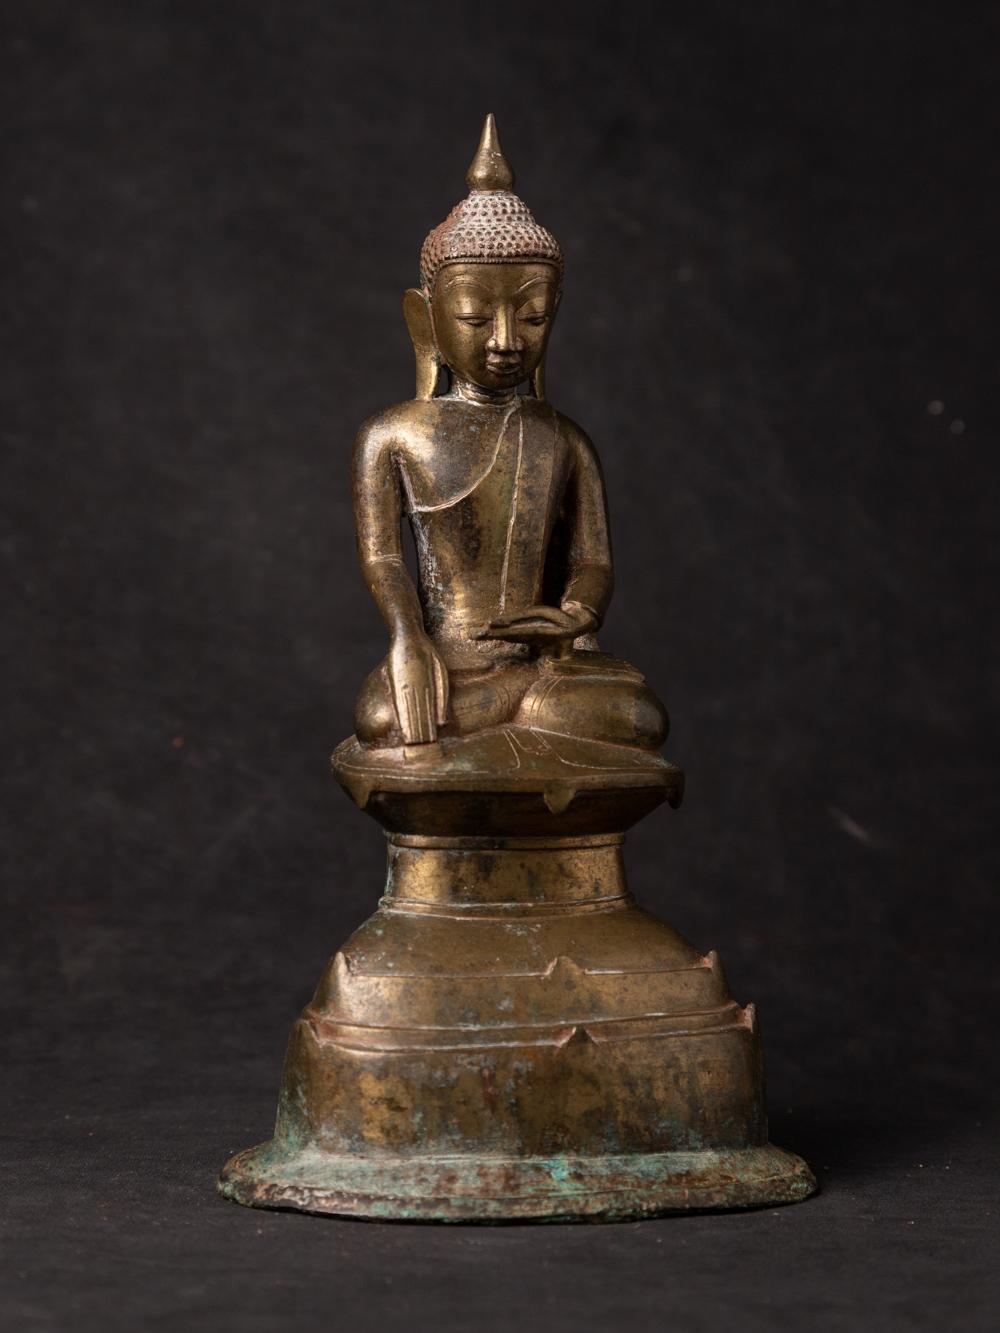 This antique bronze Buddha statue is a truly unique and special collectible piece. Standing at 25.4 cm high, 14.2 cm wide and 10.4 cm deep, it is made of bronze and it weighs 1.53 kgs. The intricate details on the statue are with traces of 24 krt